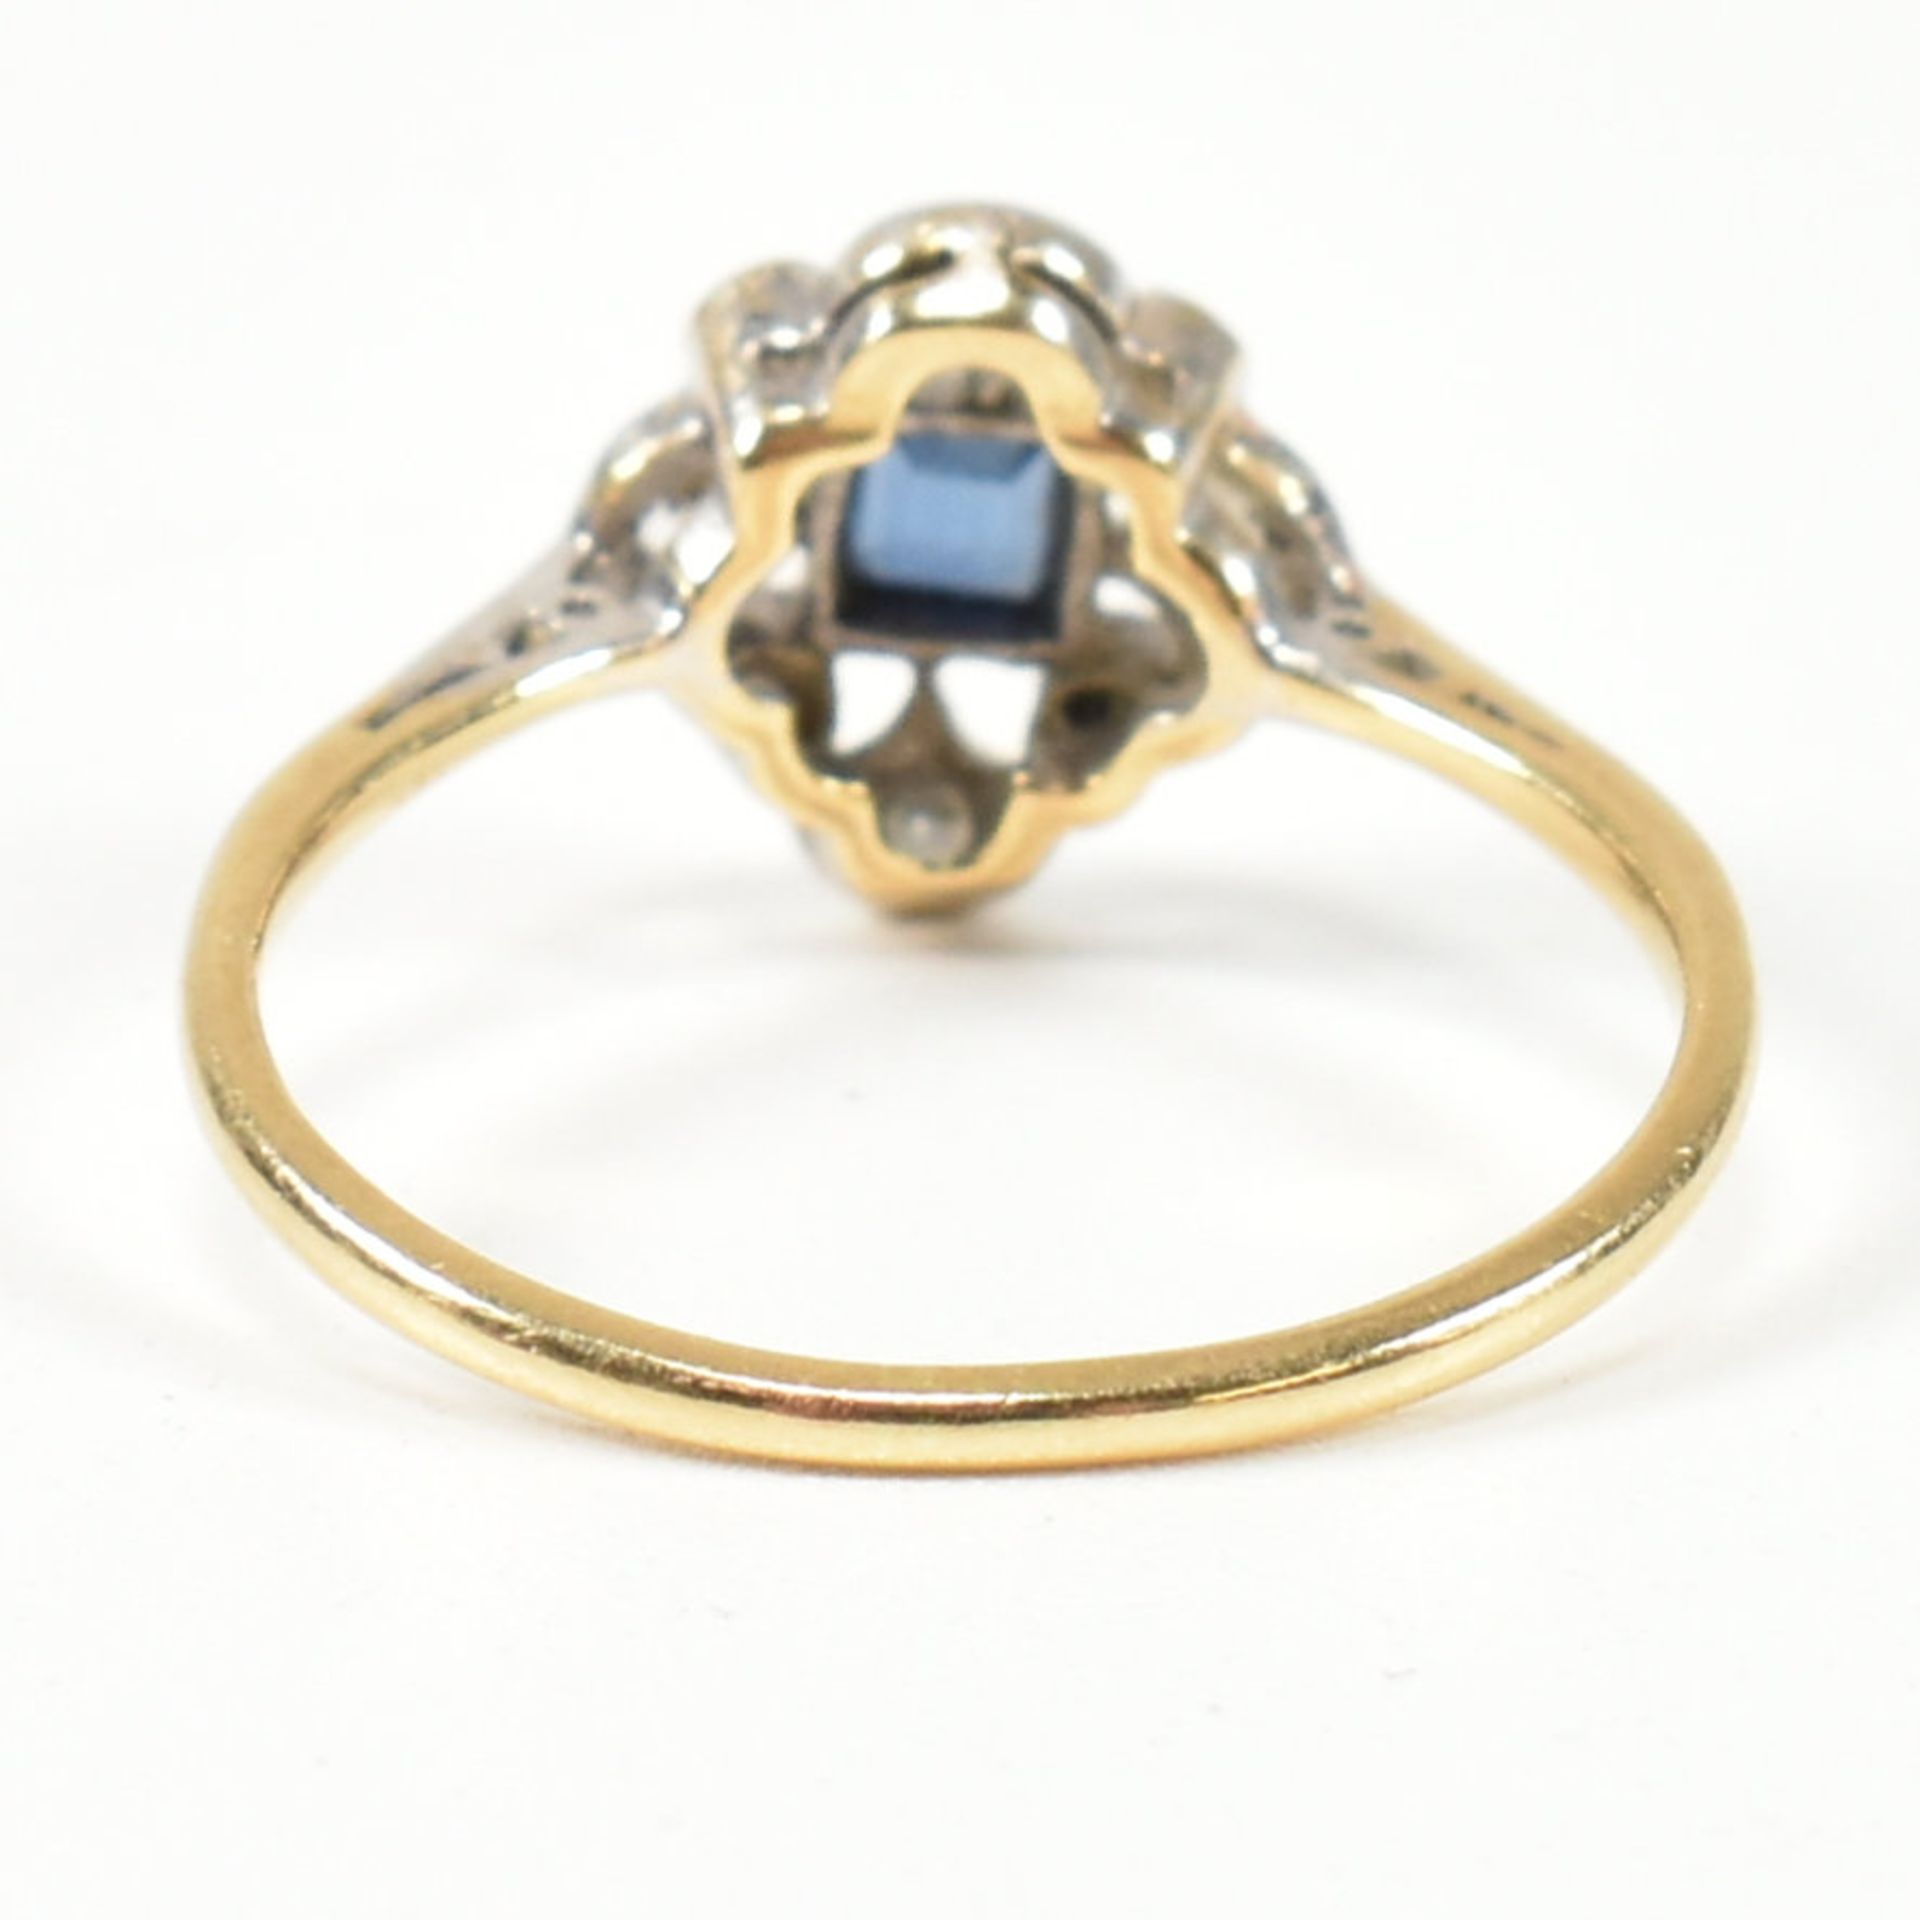 1920S 18CT GOLD SAPPHIRE & DIAMOND CLUSTER RING - Image 6 of 8